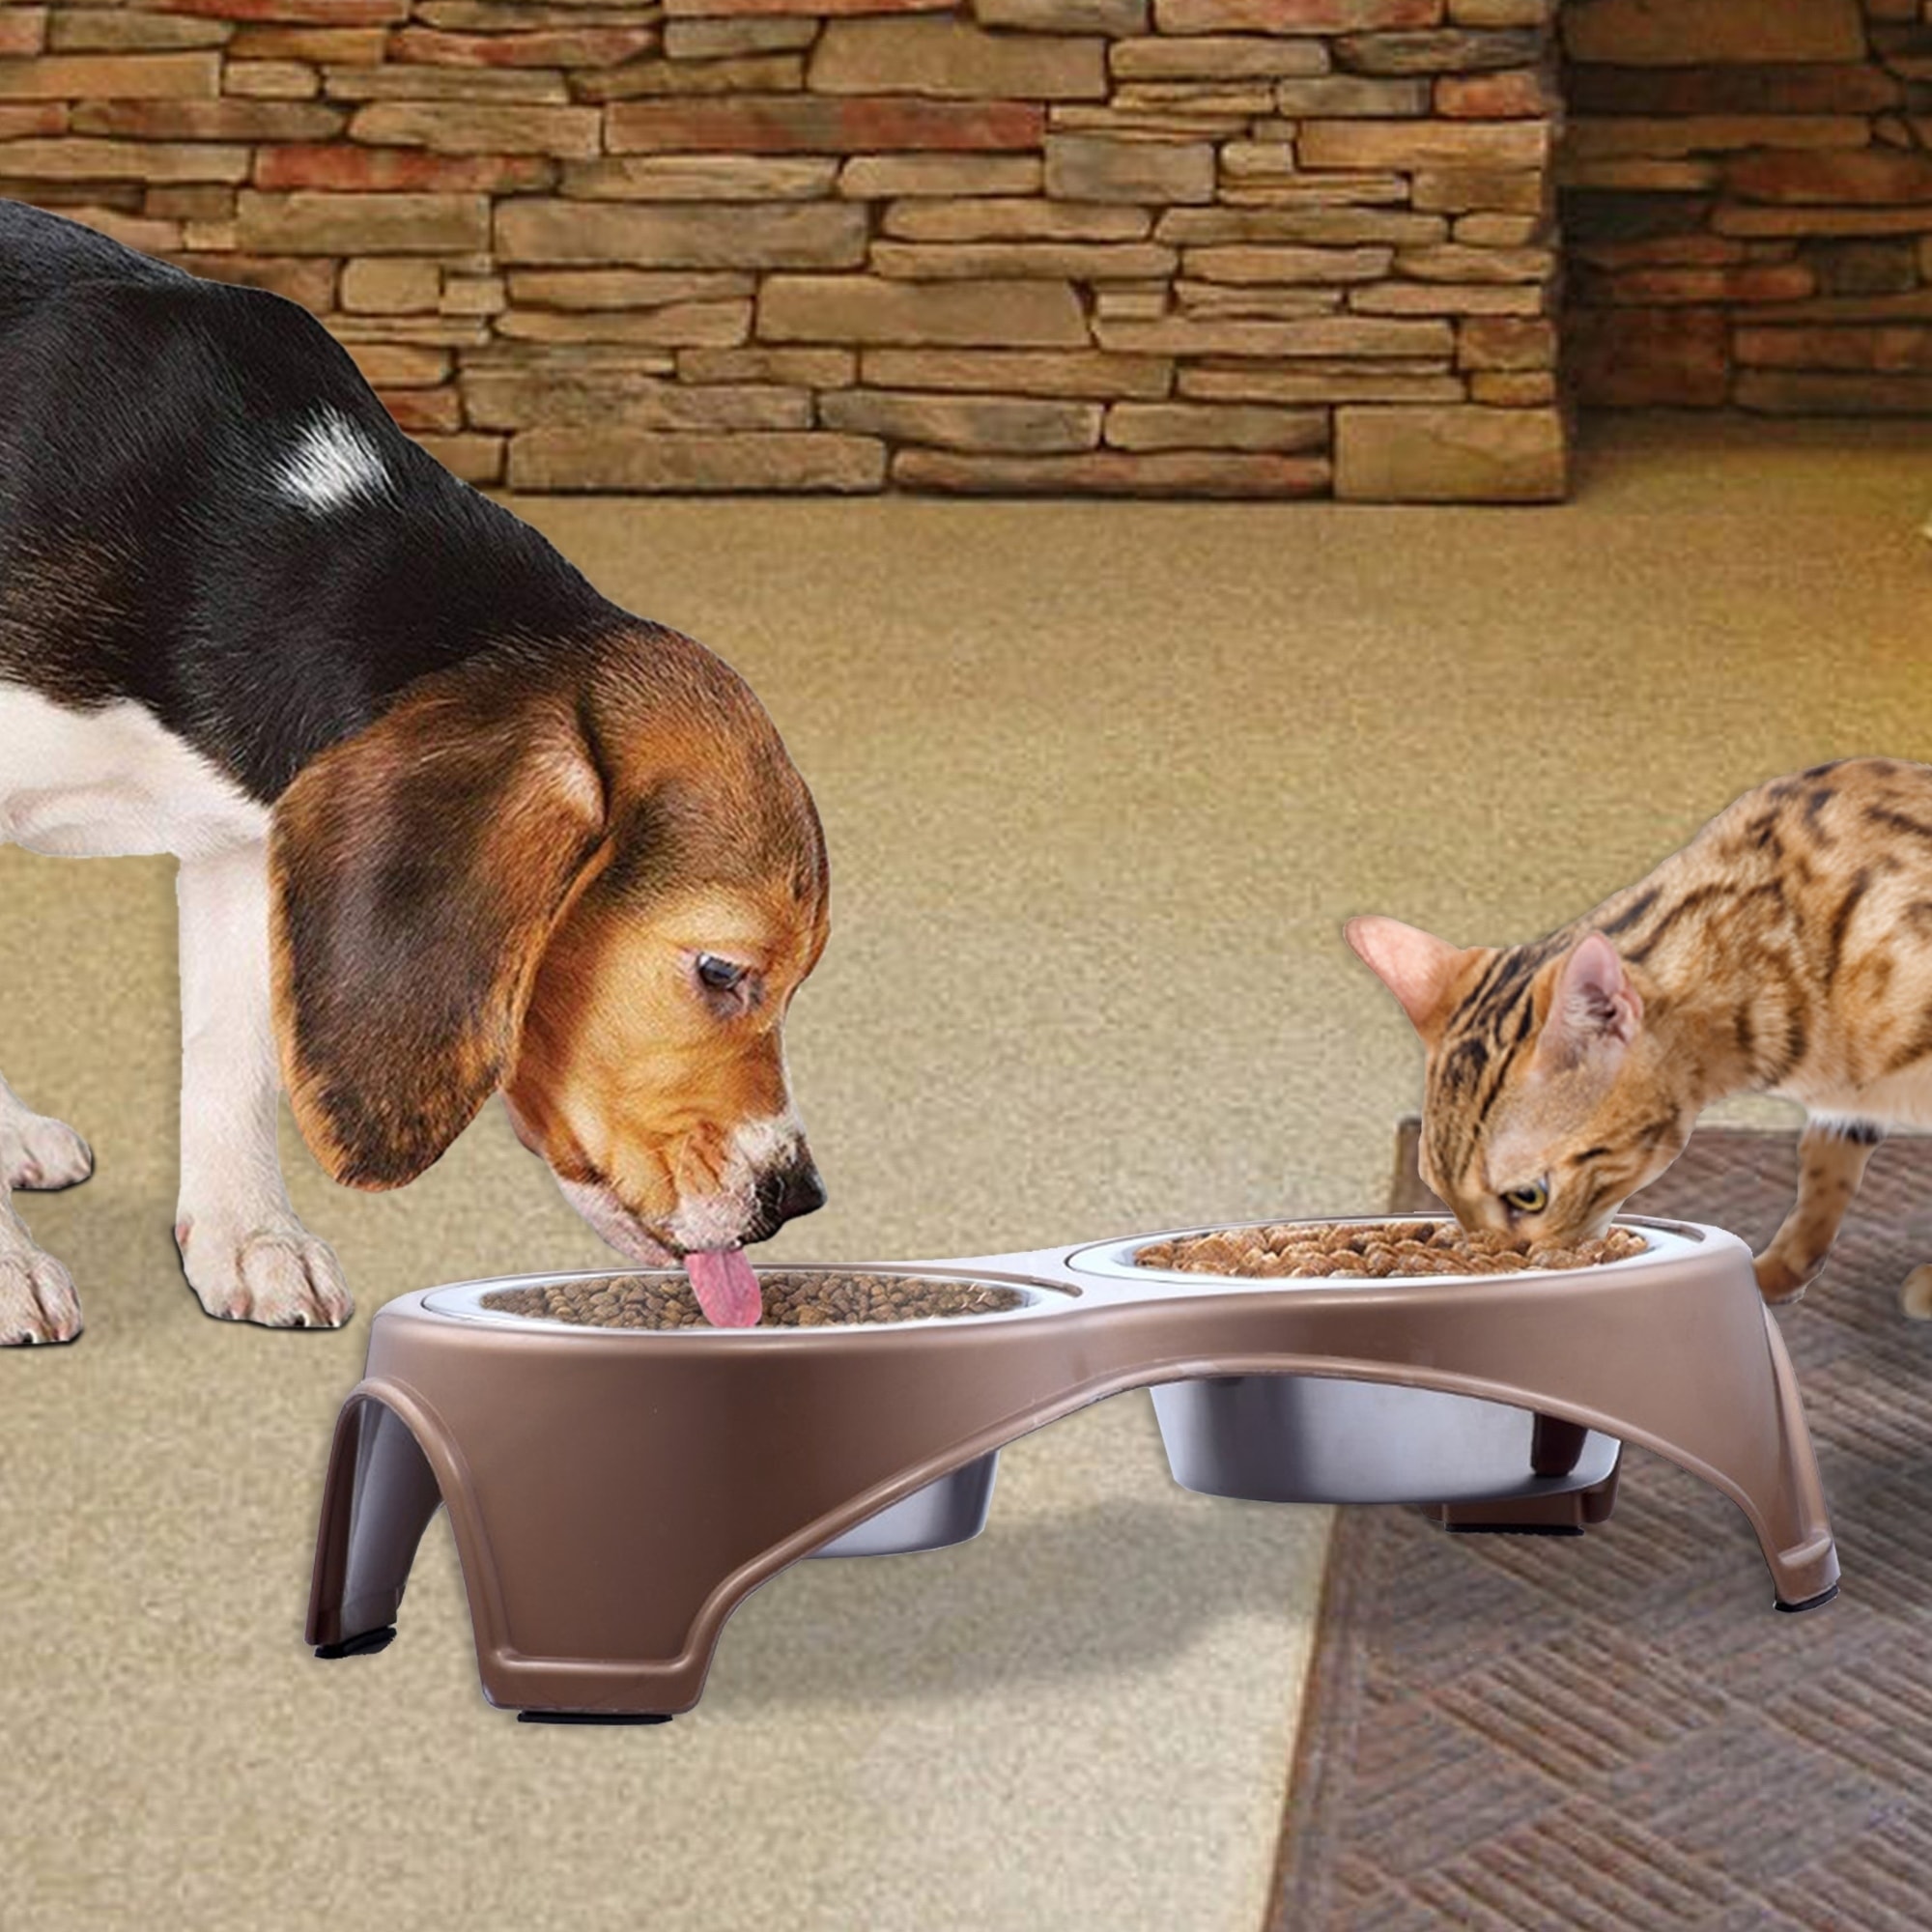 https://ak1.ostkcdn.com/images/products/30506552/Plastic-Framed-Double-Diner-Pet-Bowl-in-Stainless-Steel-Large-Gold-and-Silver-Set-of-2-772f42a0-5c5c-46e6-b0ad-a85cb98a7e1d.jpg